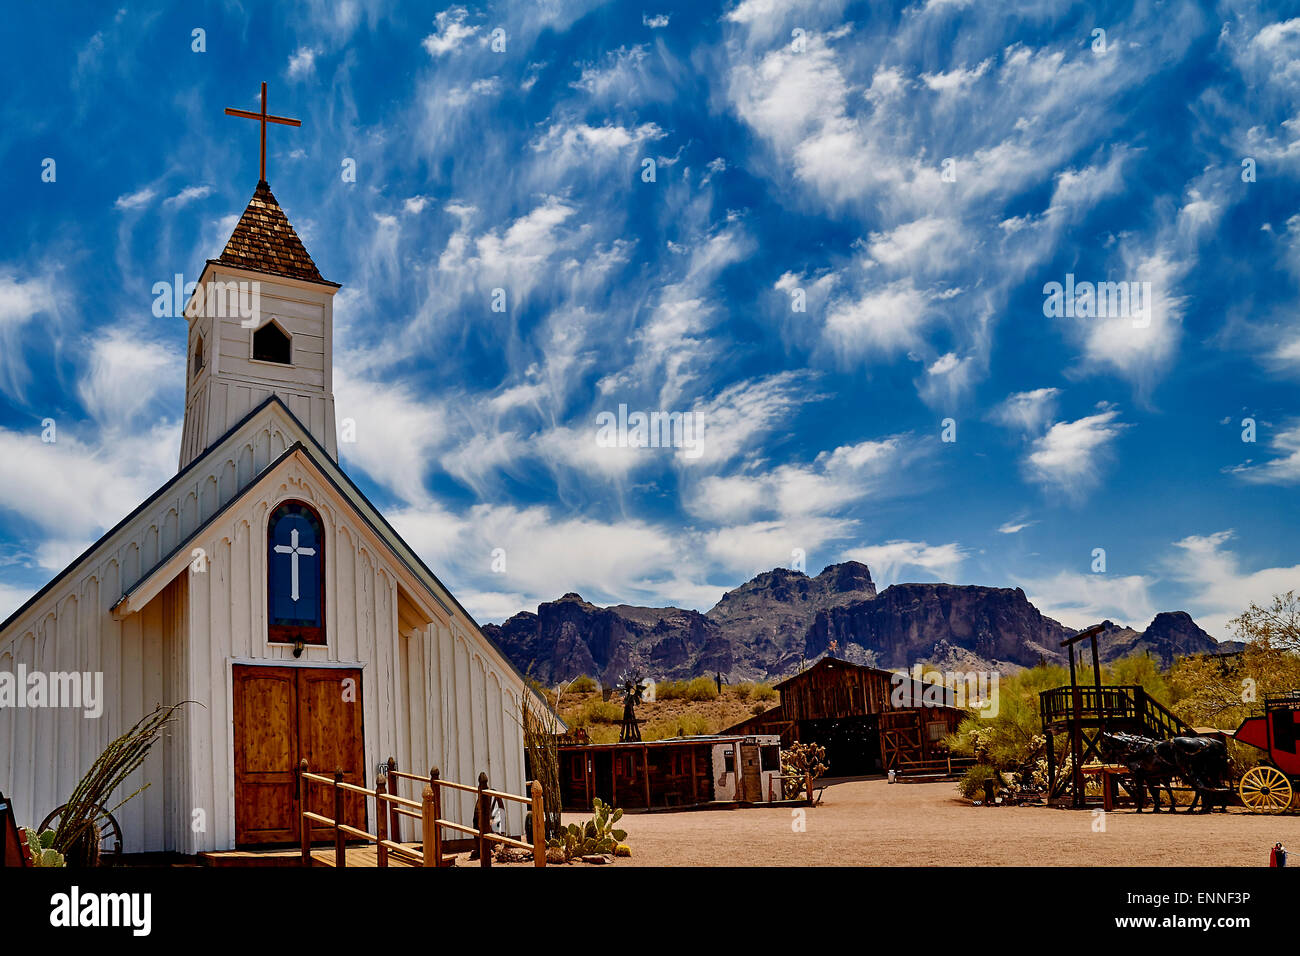 Old Church In Arizona Western Town With Mountains In Background